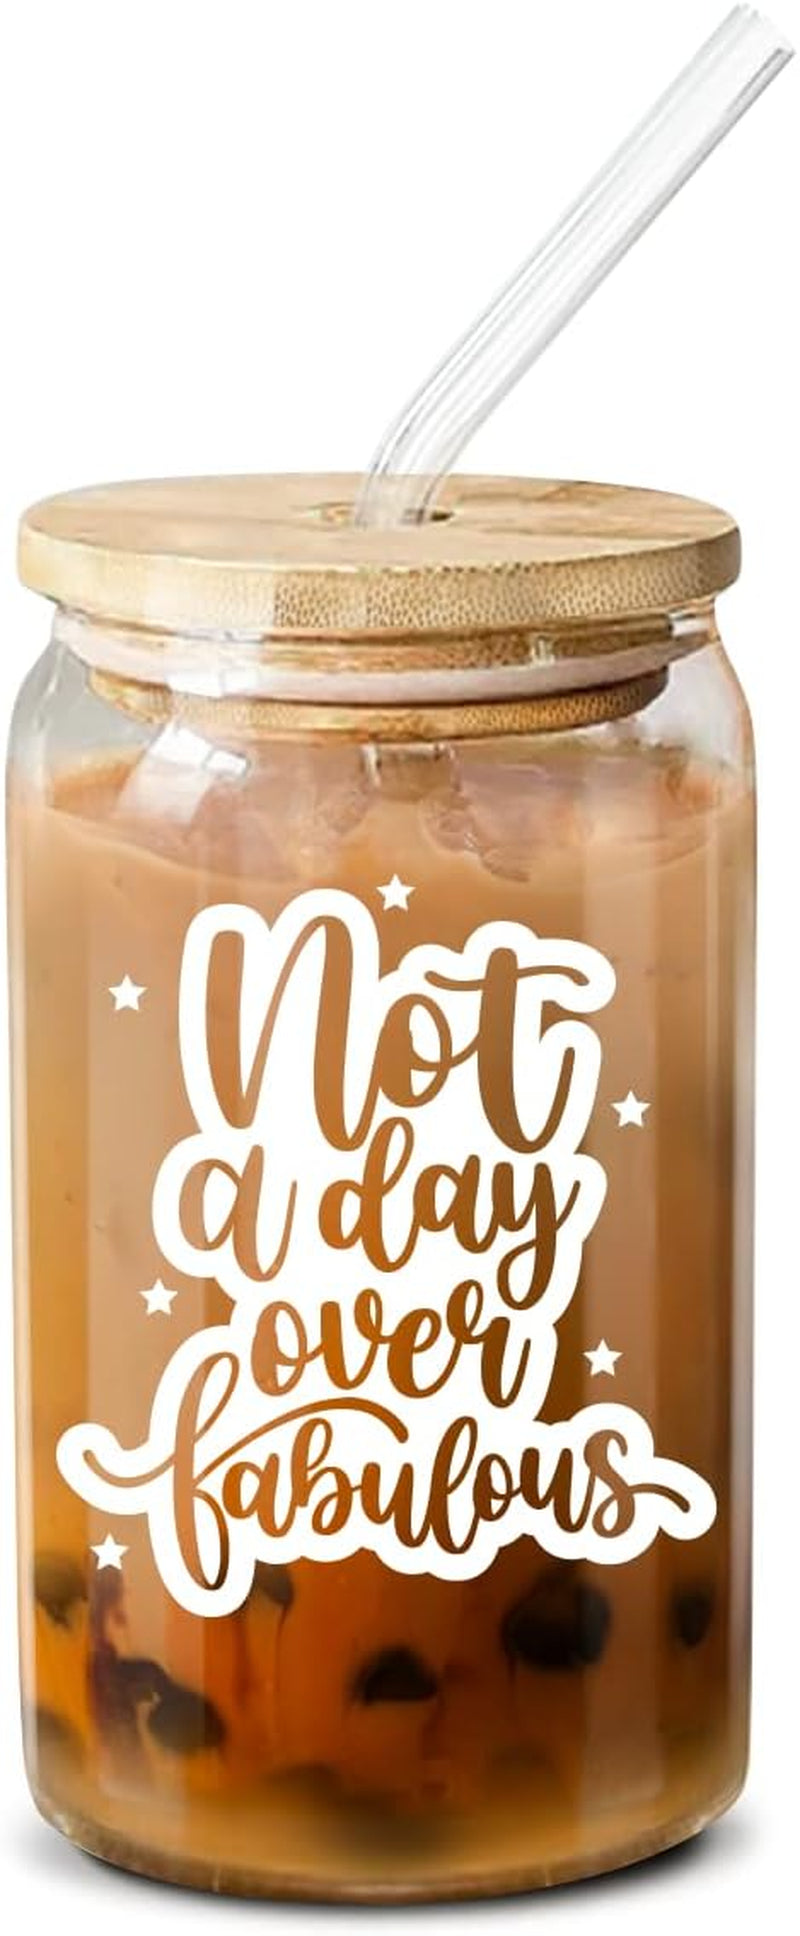 NewEleven Glass Cups With Bamboo Lids and Straws For Coffee, Boha Tea, Smoothie, Cocktail - Iced Coffee Cup, Smoothie Cup, Reusable Boba Cup - 16 Oz Coffee Glass…